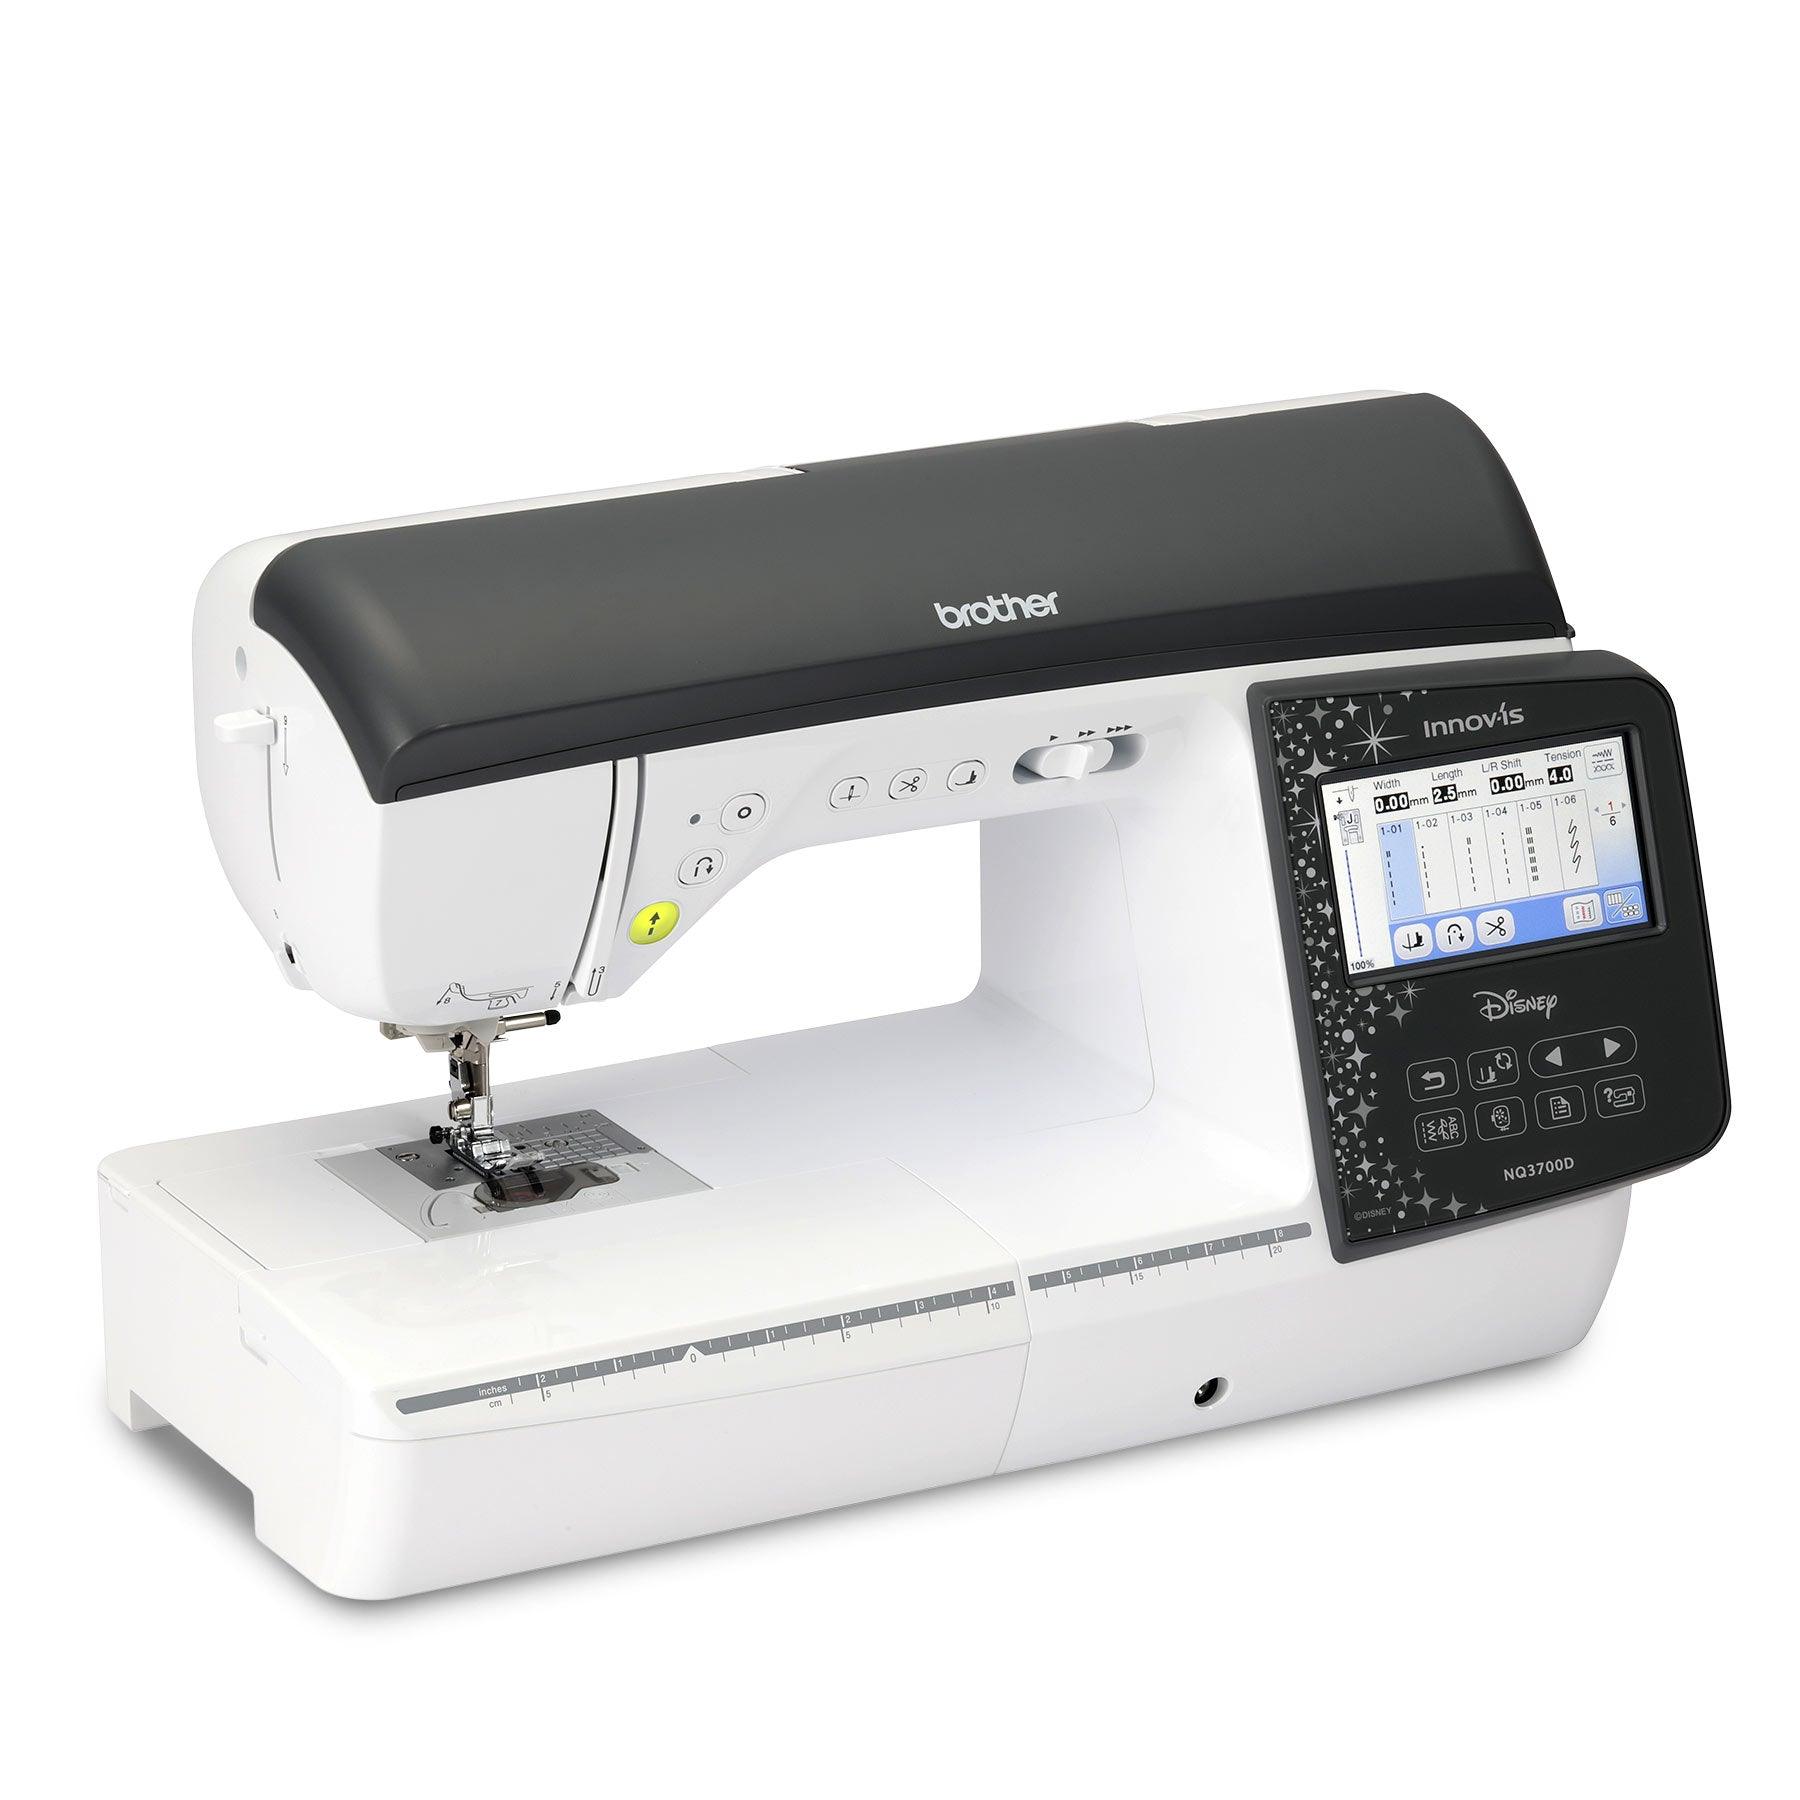 Brother NQ3700D The Fashionista 2 - Kawartha Quilting and Sewing LTD.